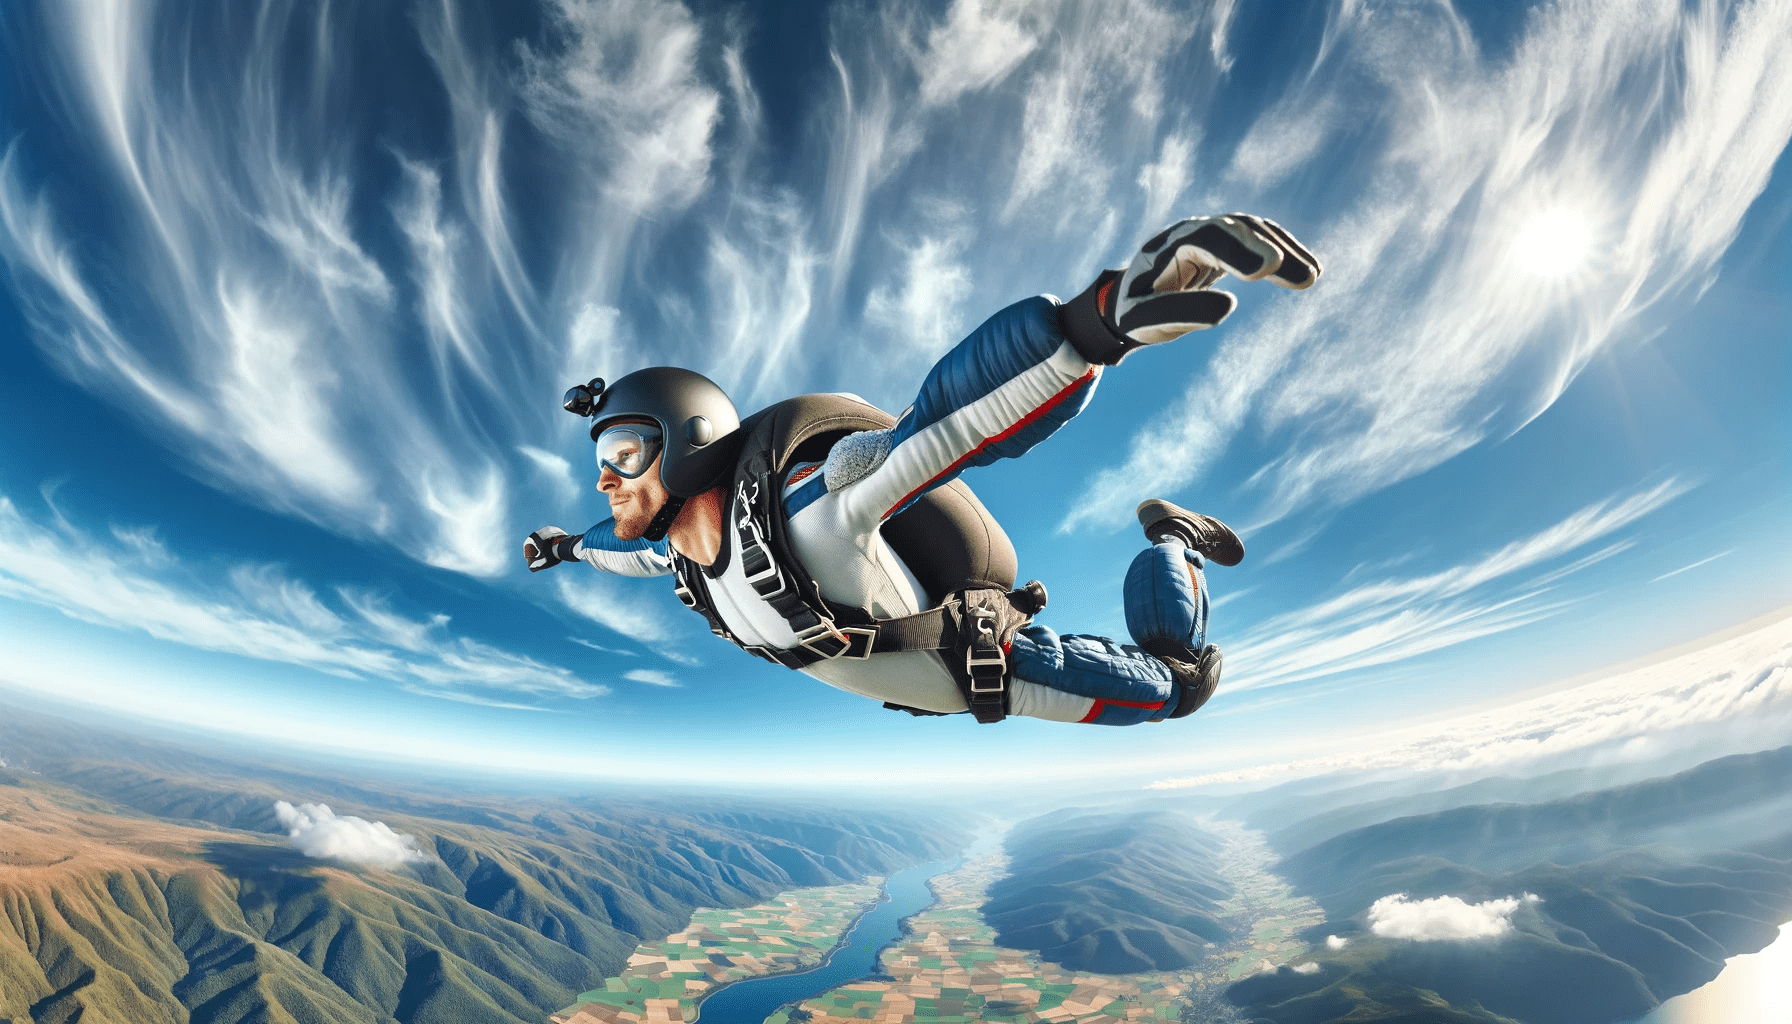 Can You Skydive Out of Your Own Plane? Find Out Here!